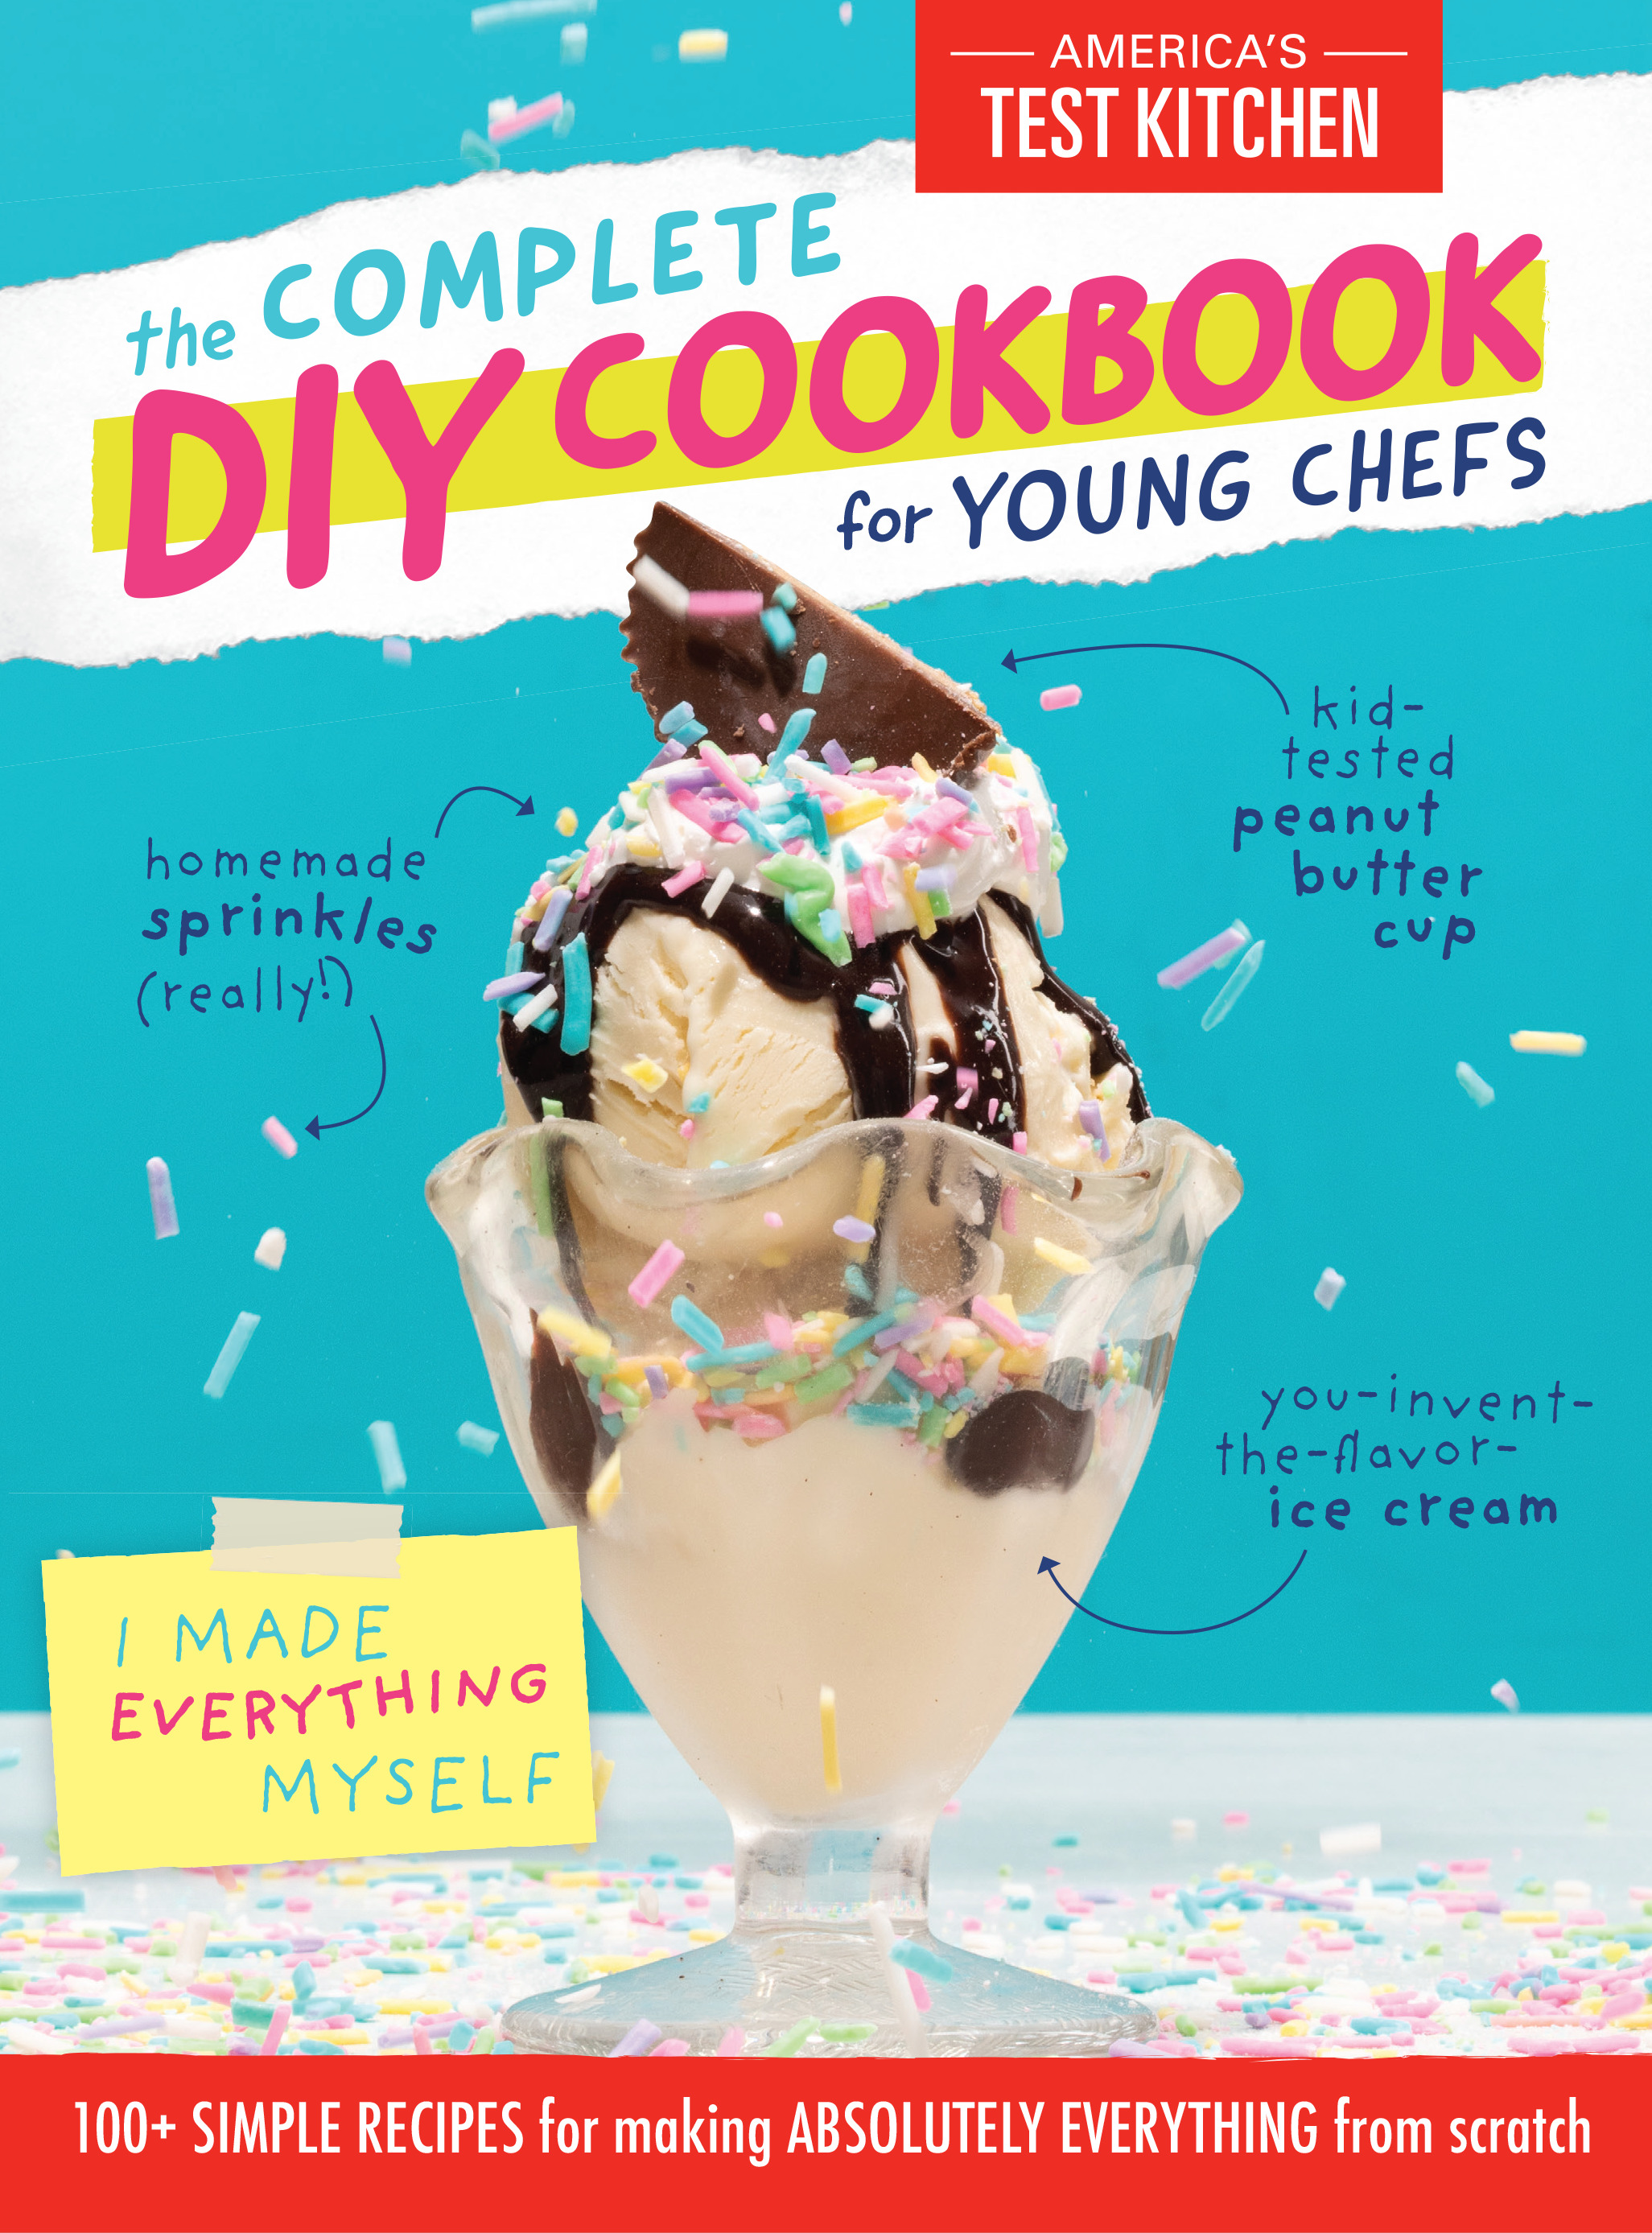 The Complete DIY Cookbook for Young Chefs : 100+ Simple Recipes for Making Absolutely Everything from Scratch | America's Test Kitchen Kids